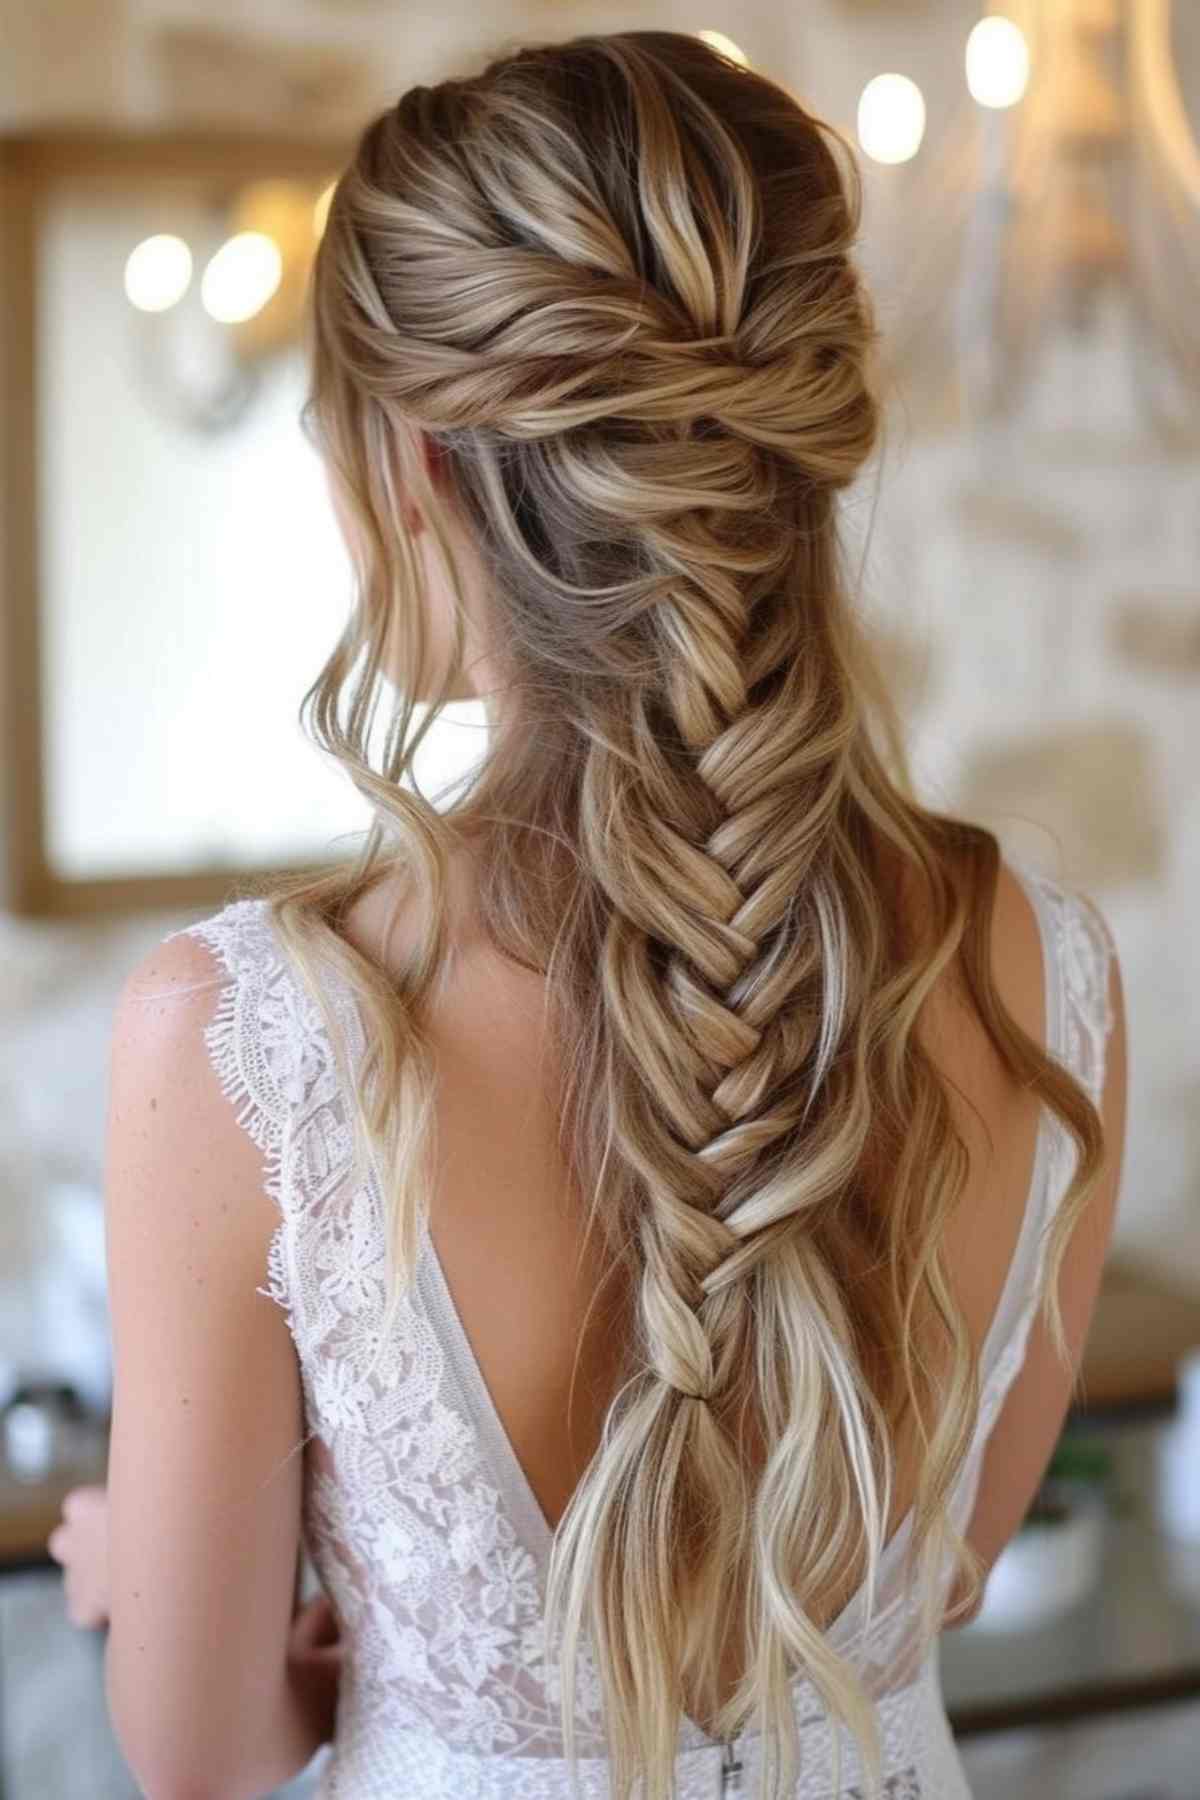 Awesome hairstyles to match your prom dress - Calyxta